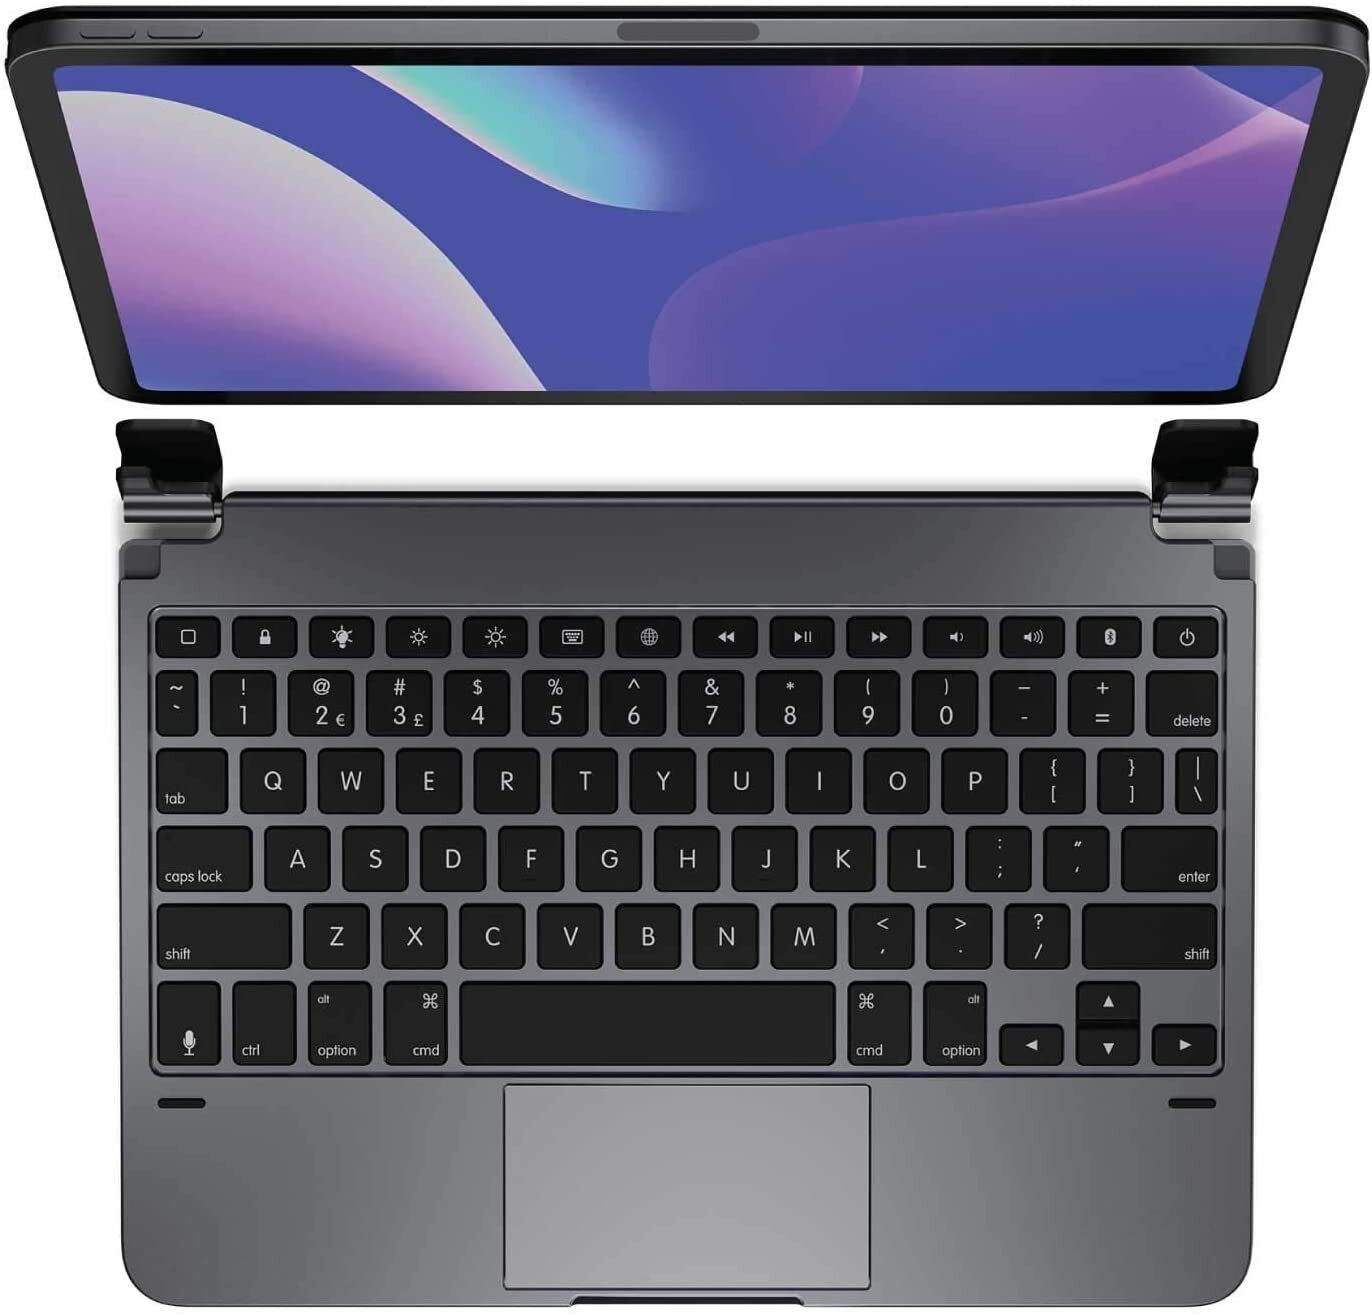 Brydge 11.0 Pro+ Wireless Keyboard with Trackpad For iPad Pro 11-inch - Gray